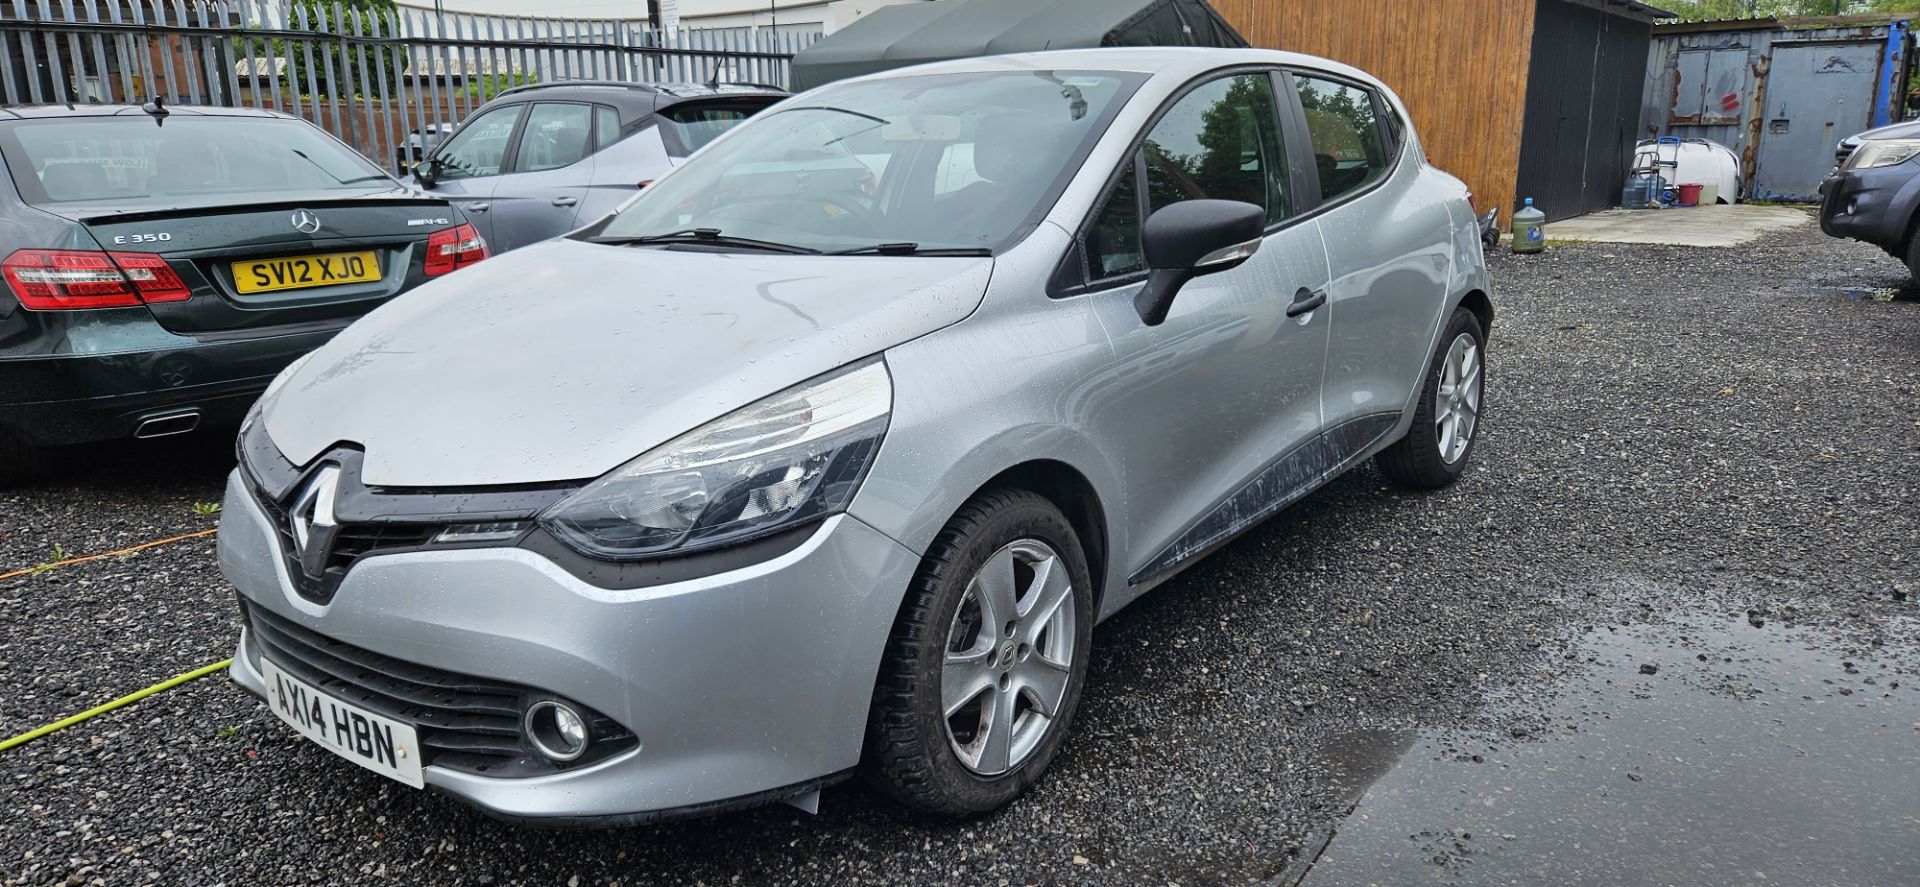 2014 RENAULT CLIO HATCHBACK - FULL SERVICE HISTORY